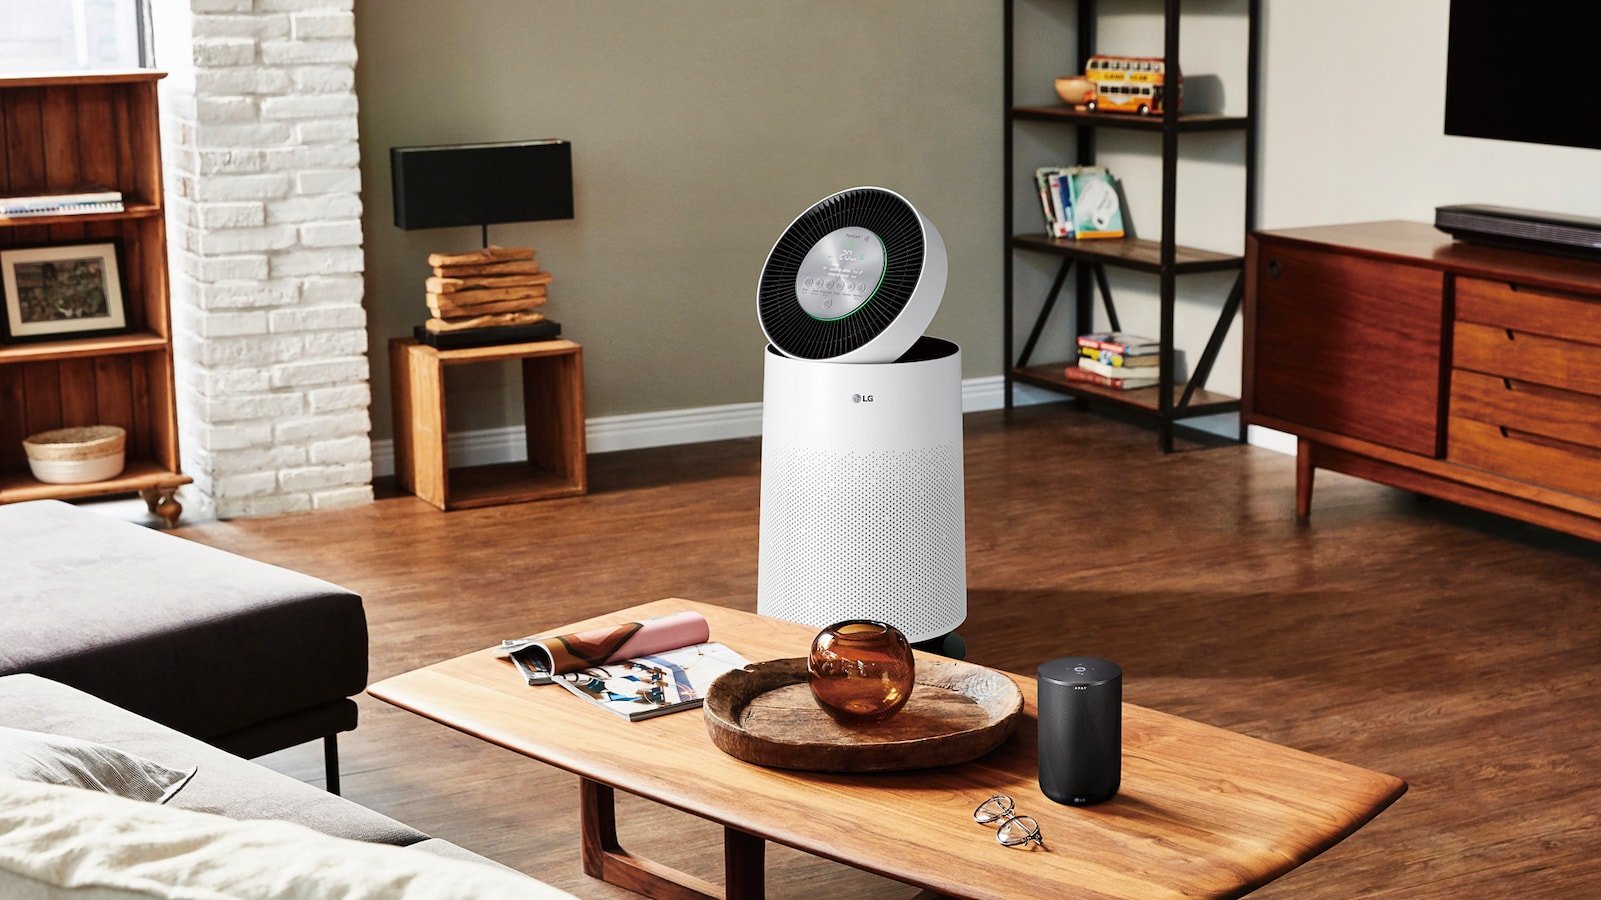 LG PuriCare 360° SmartThinQ air purifier cleans the air in rooms up to 310 square feet